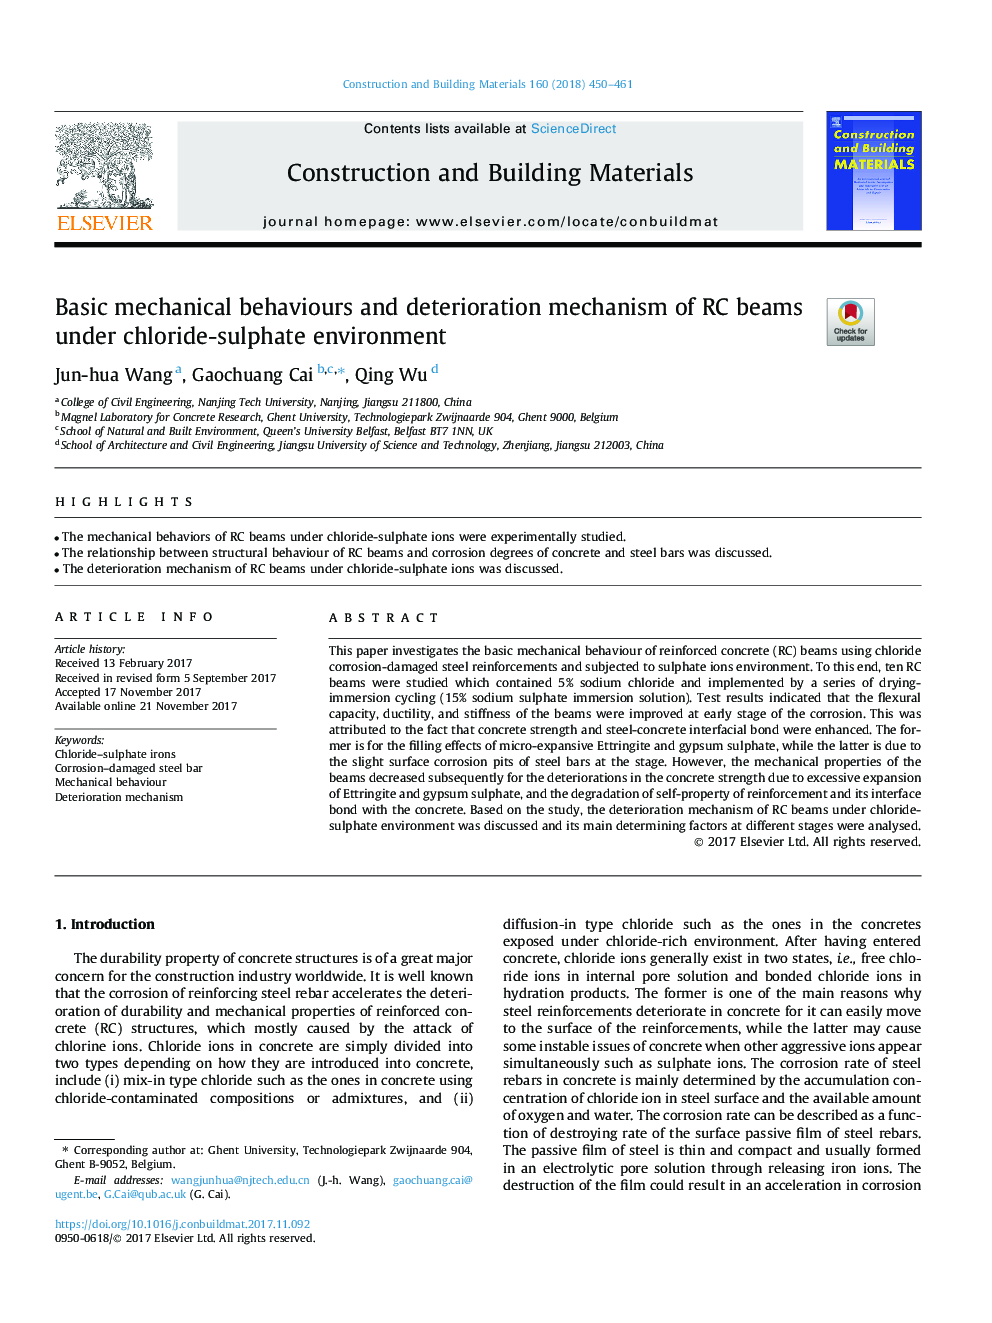 Basic mechanical behaviours and deterioration mechanism of RC beams under chloride-sulphate environment